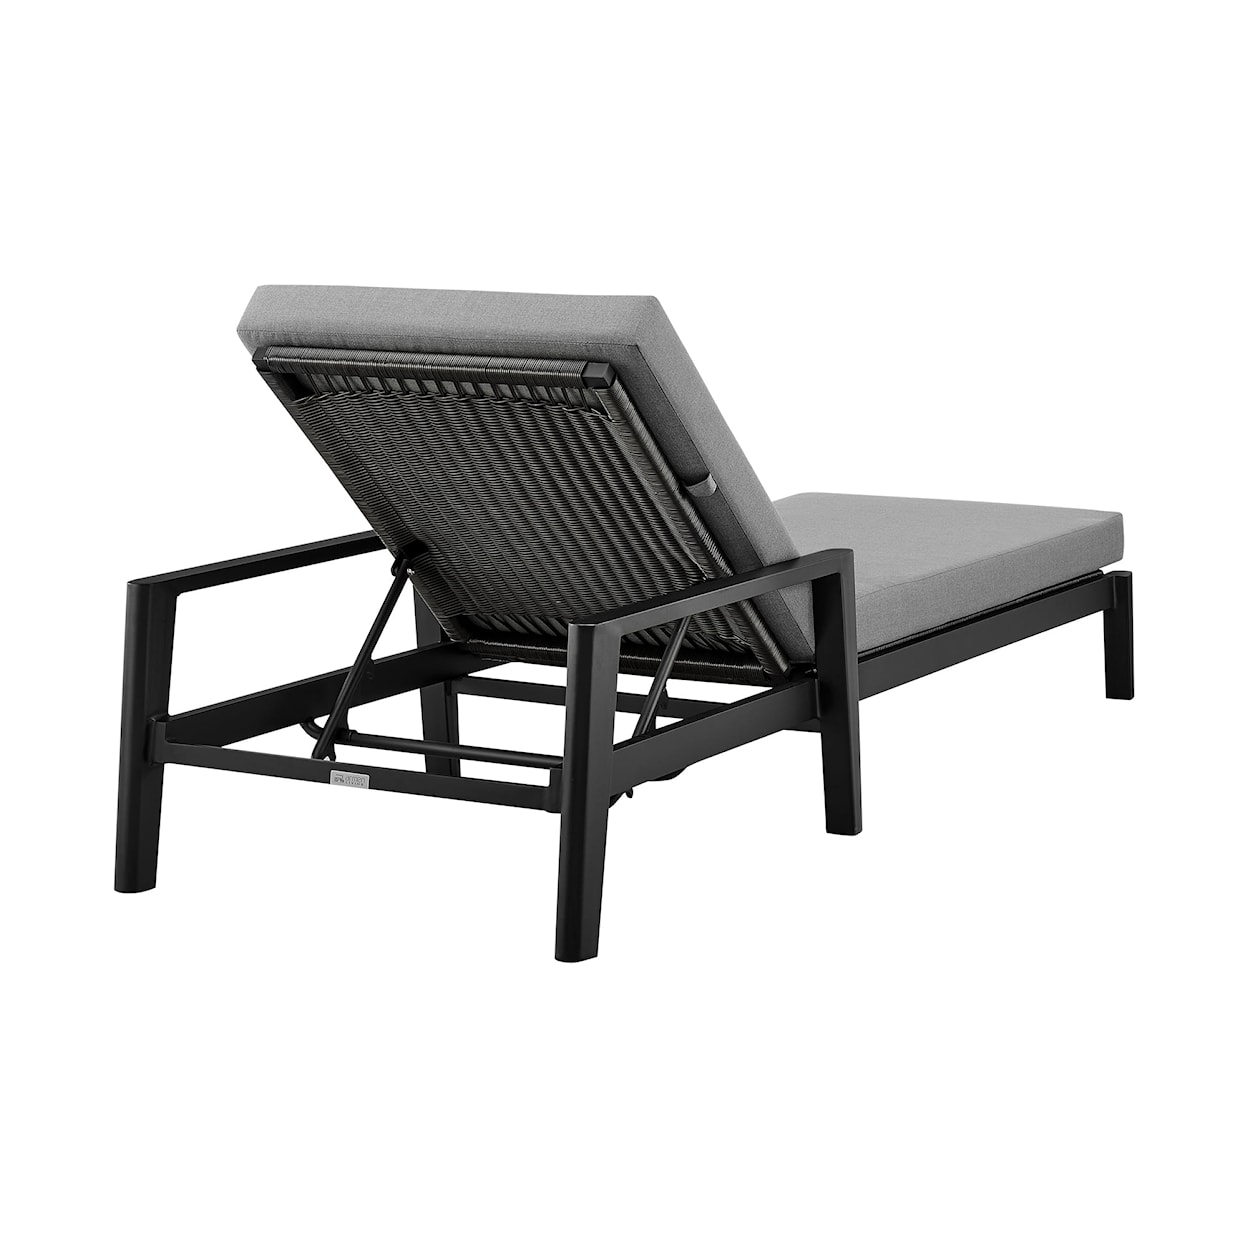 Armen Living Cayman Outdoor Chaise Lounge